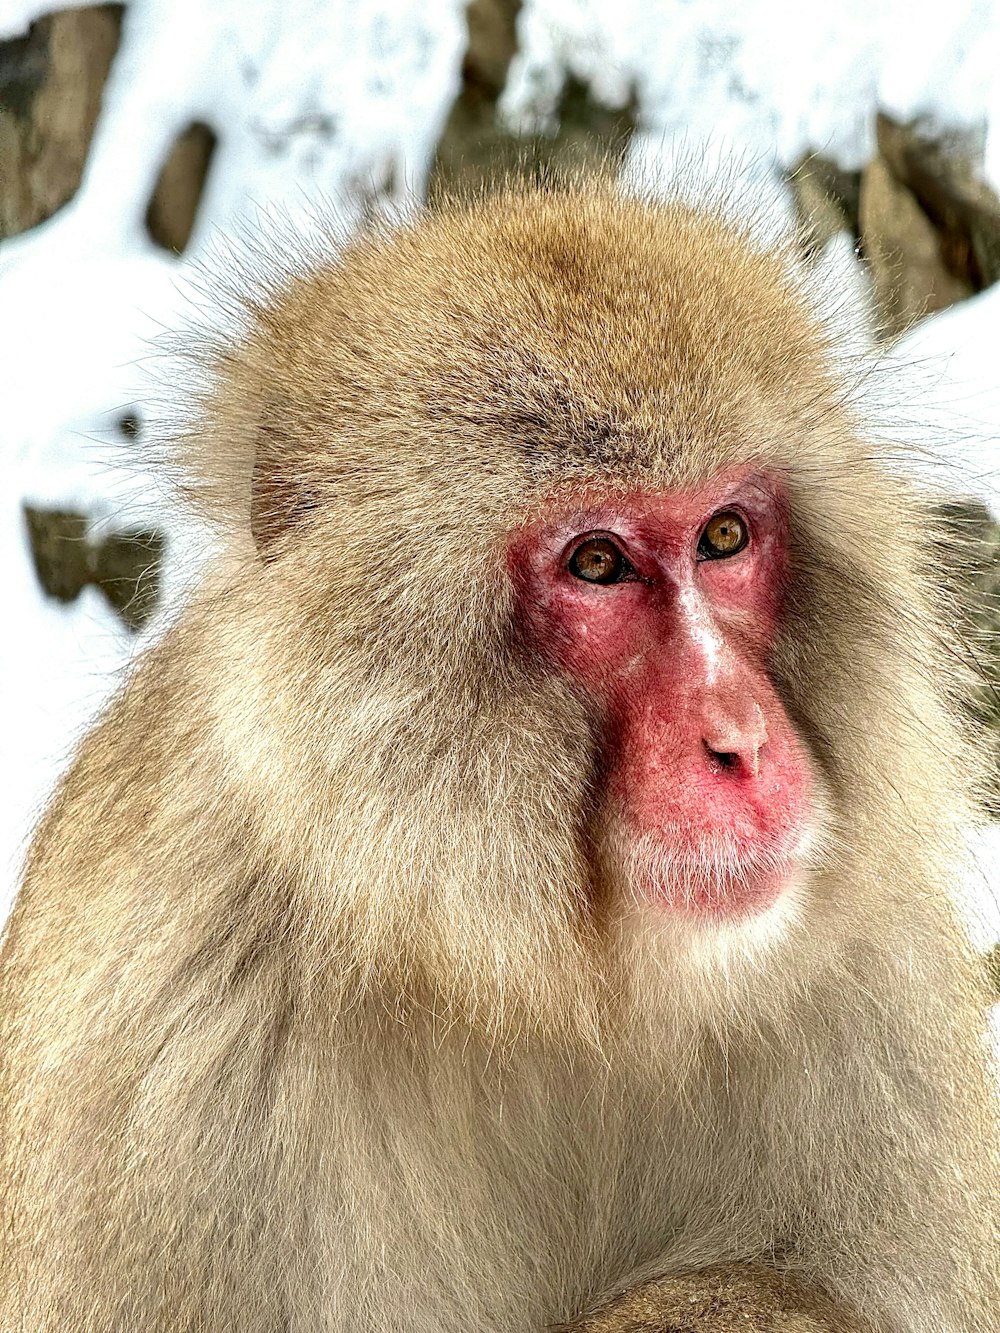 a close up of a monkey on a snowy surface